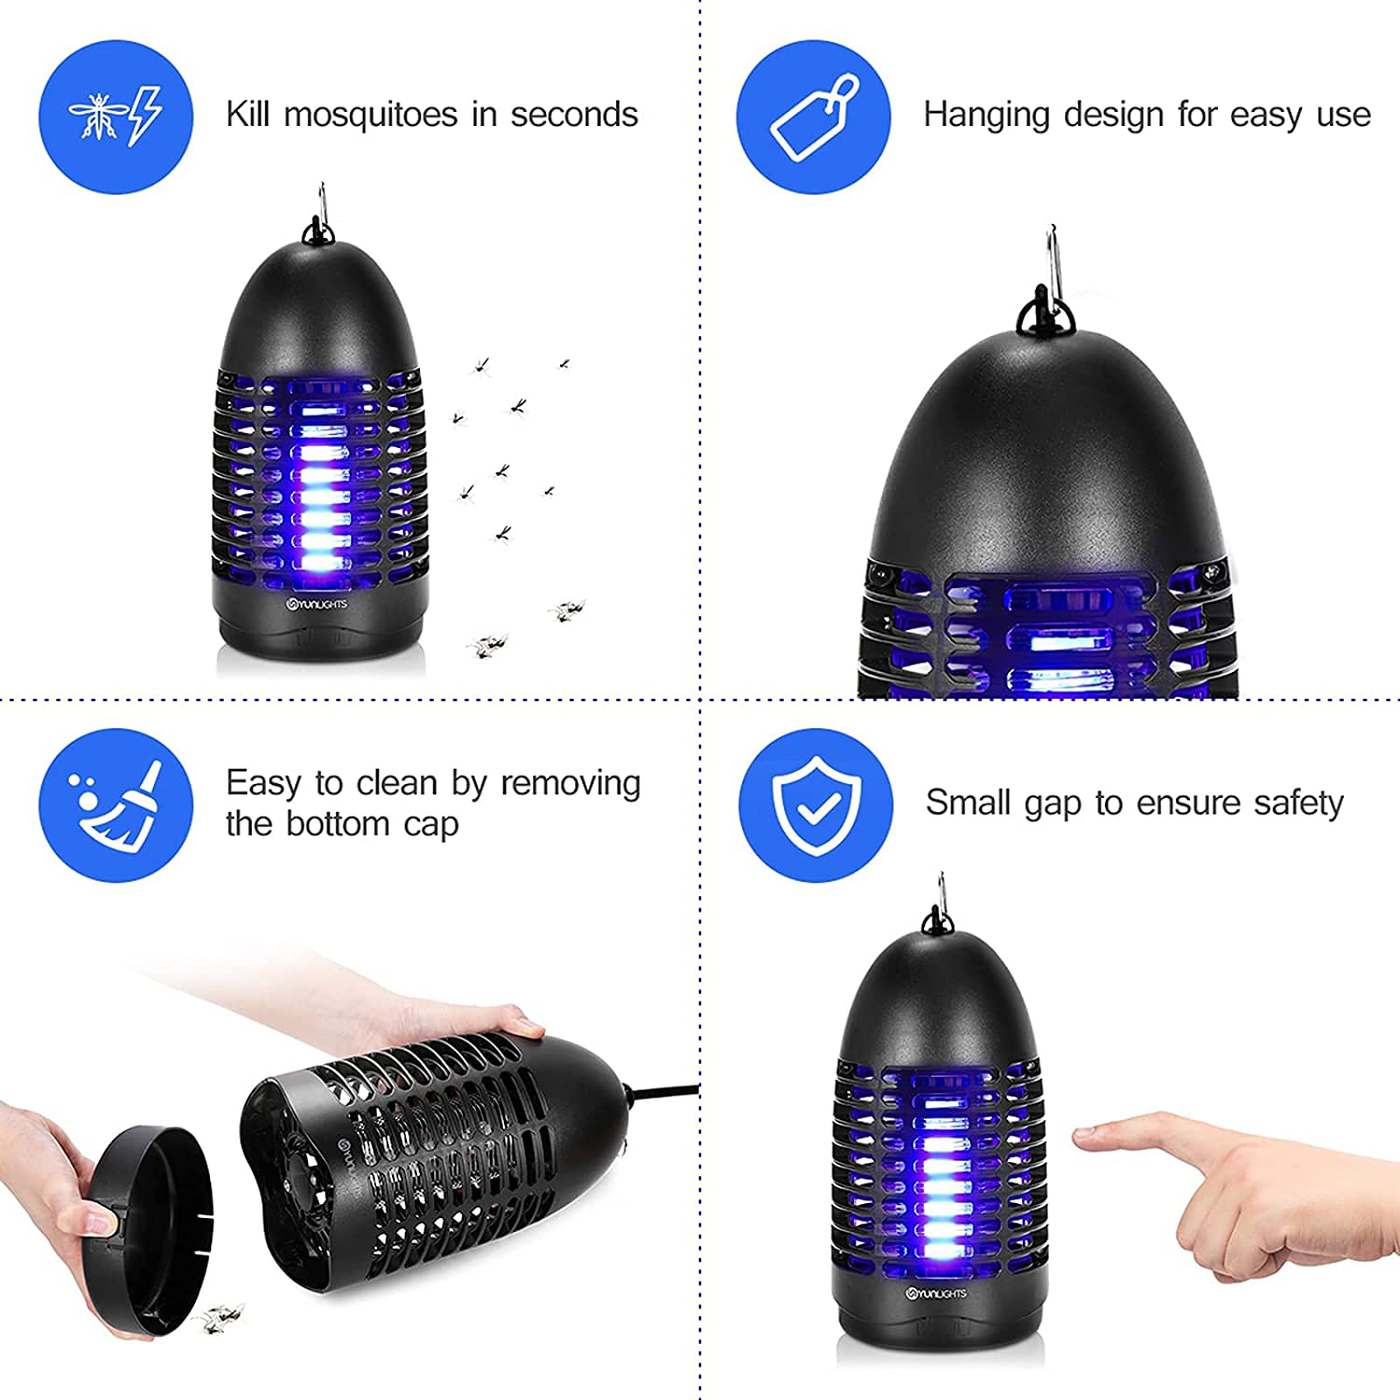 YUNLIGHTS Electric Fly Killer, 7w Plug-in Fly Traps Mosquito Bug Zapper with Hanging Hook, Powerful Flying Insect Trap Mosquito Killer Lamp for Home Indoor Outdoors